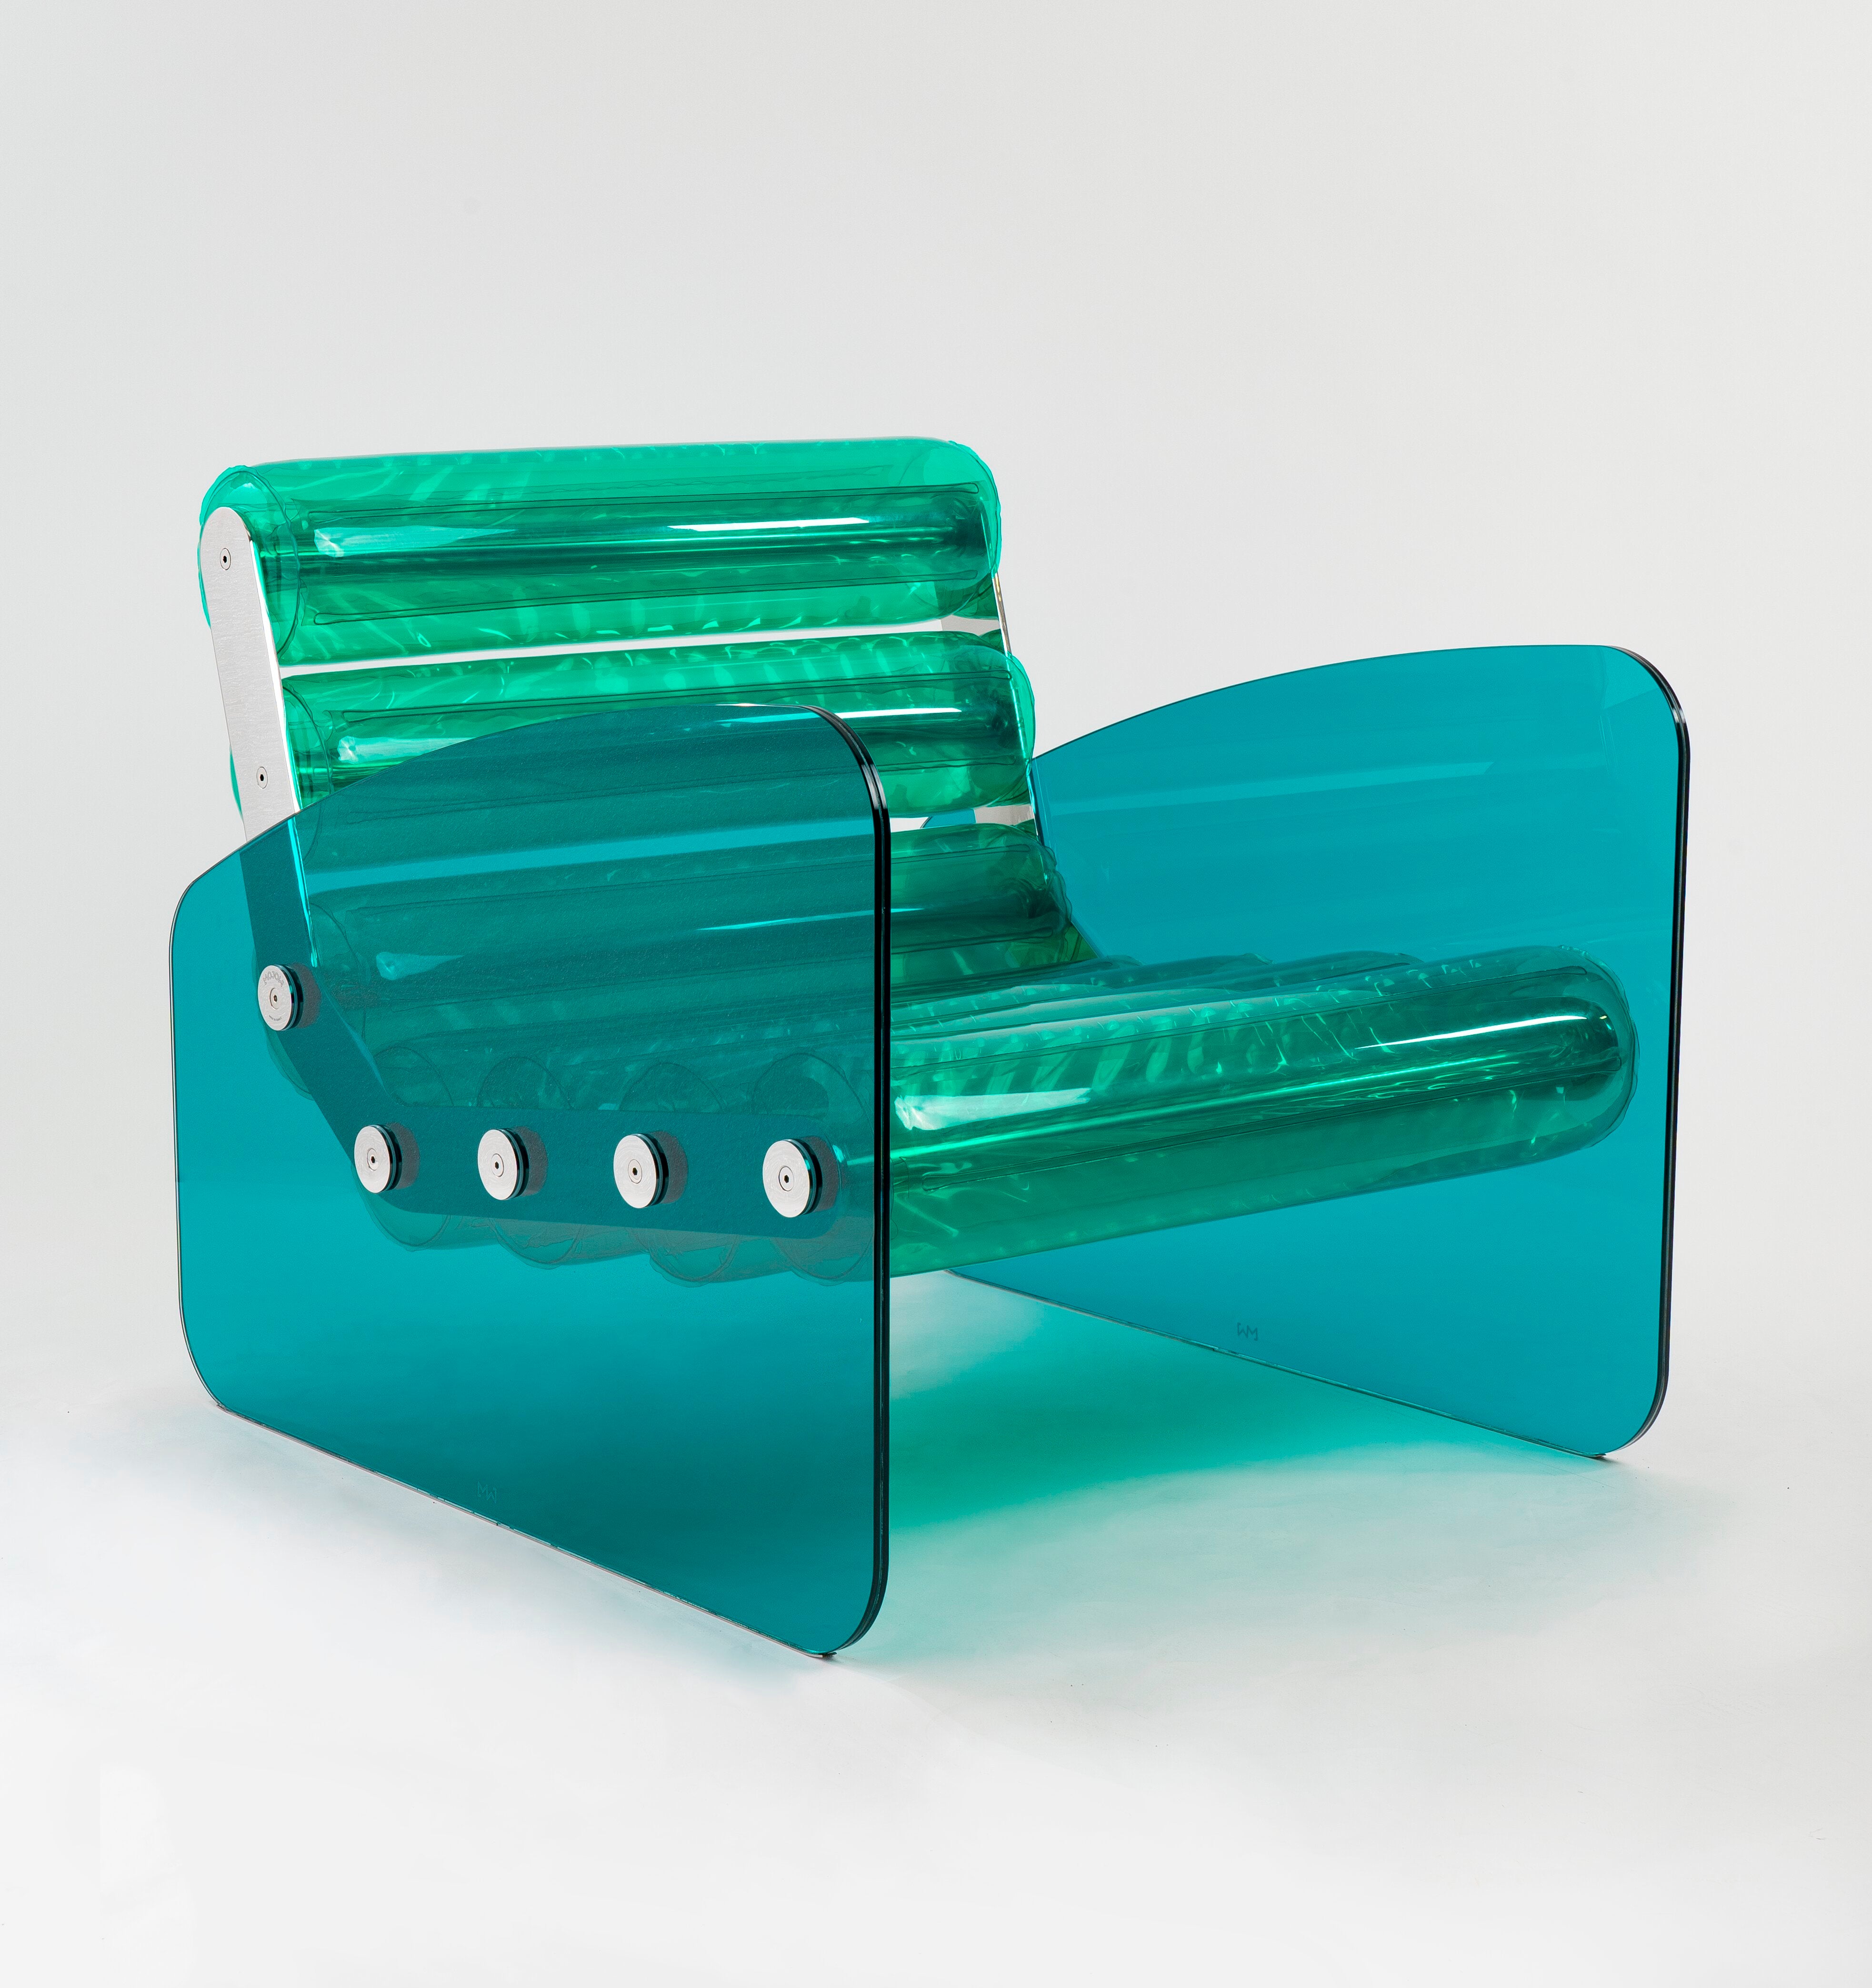 MW03 - Armchair with PMMA structure, blue and green